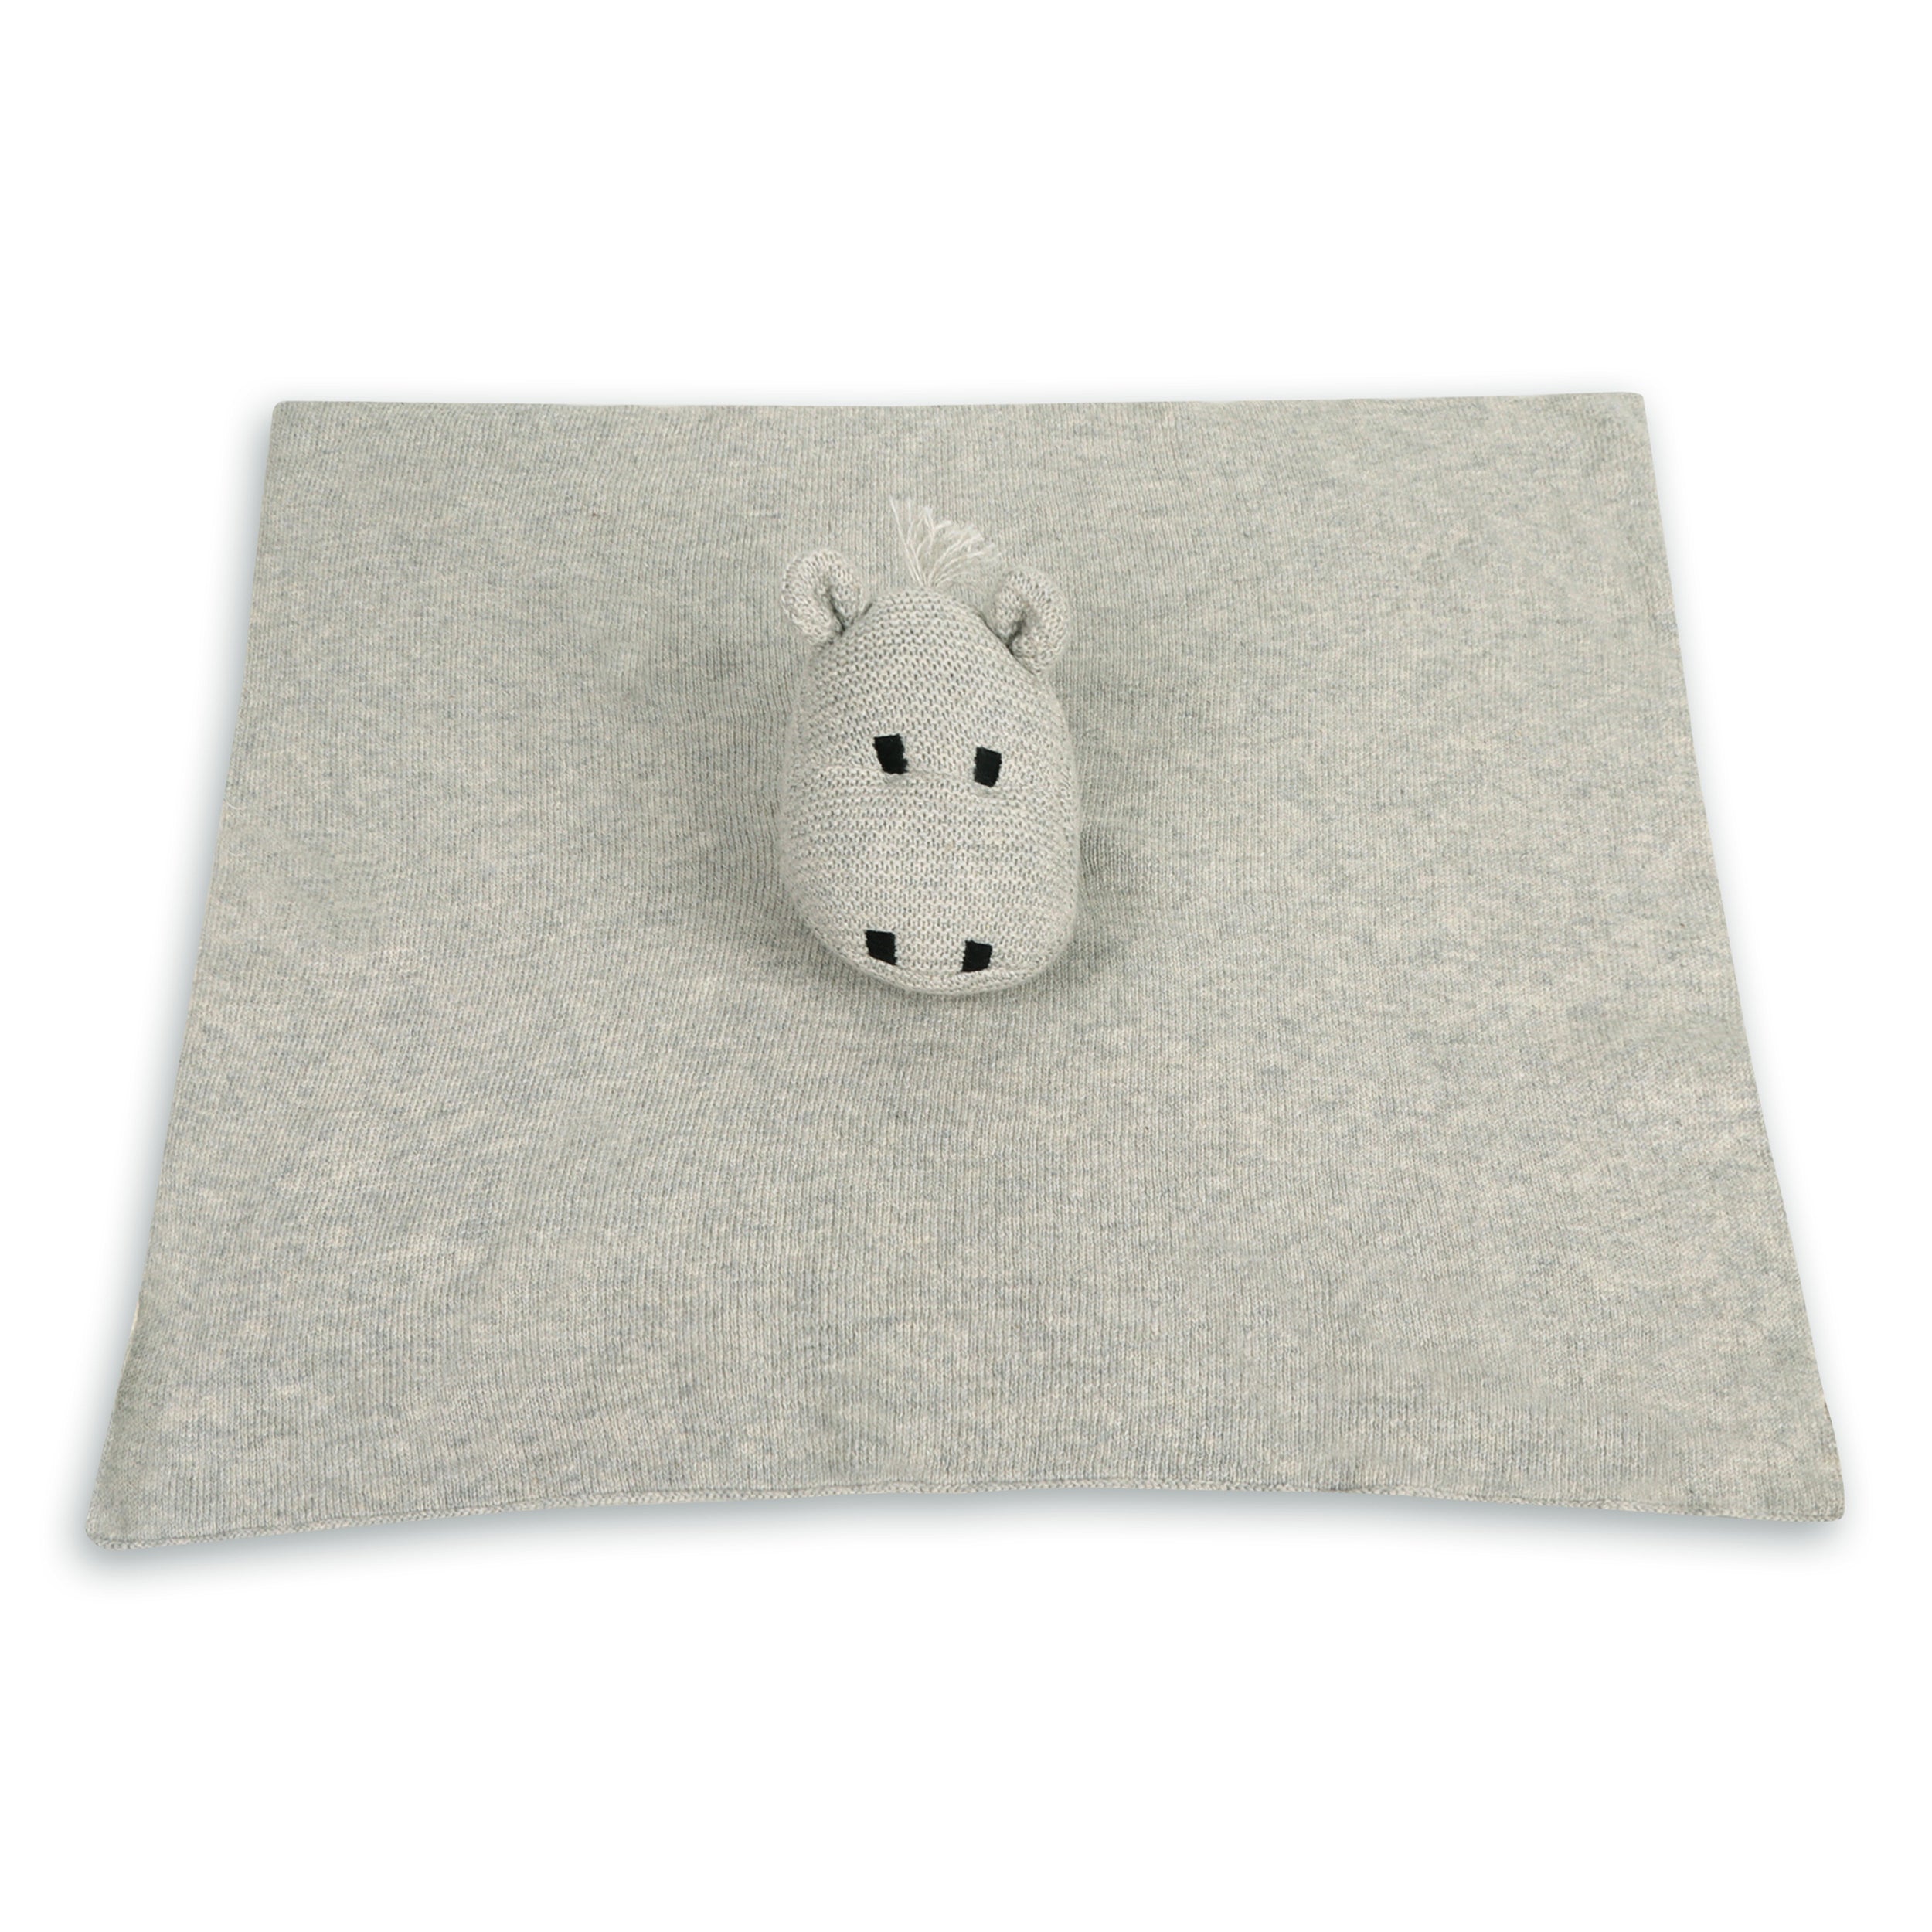 Hippo - Organic Baby Lovey Security Blanket